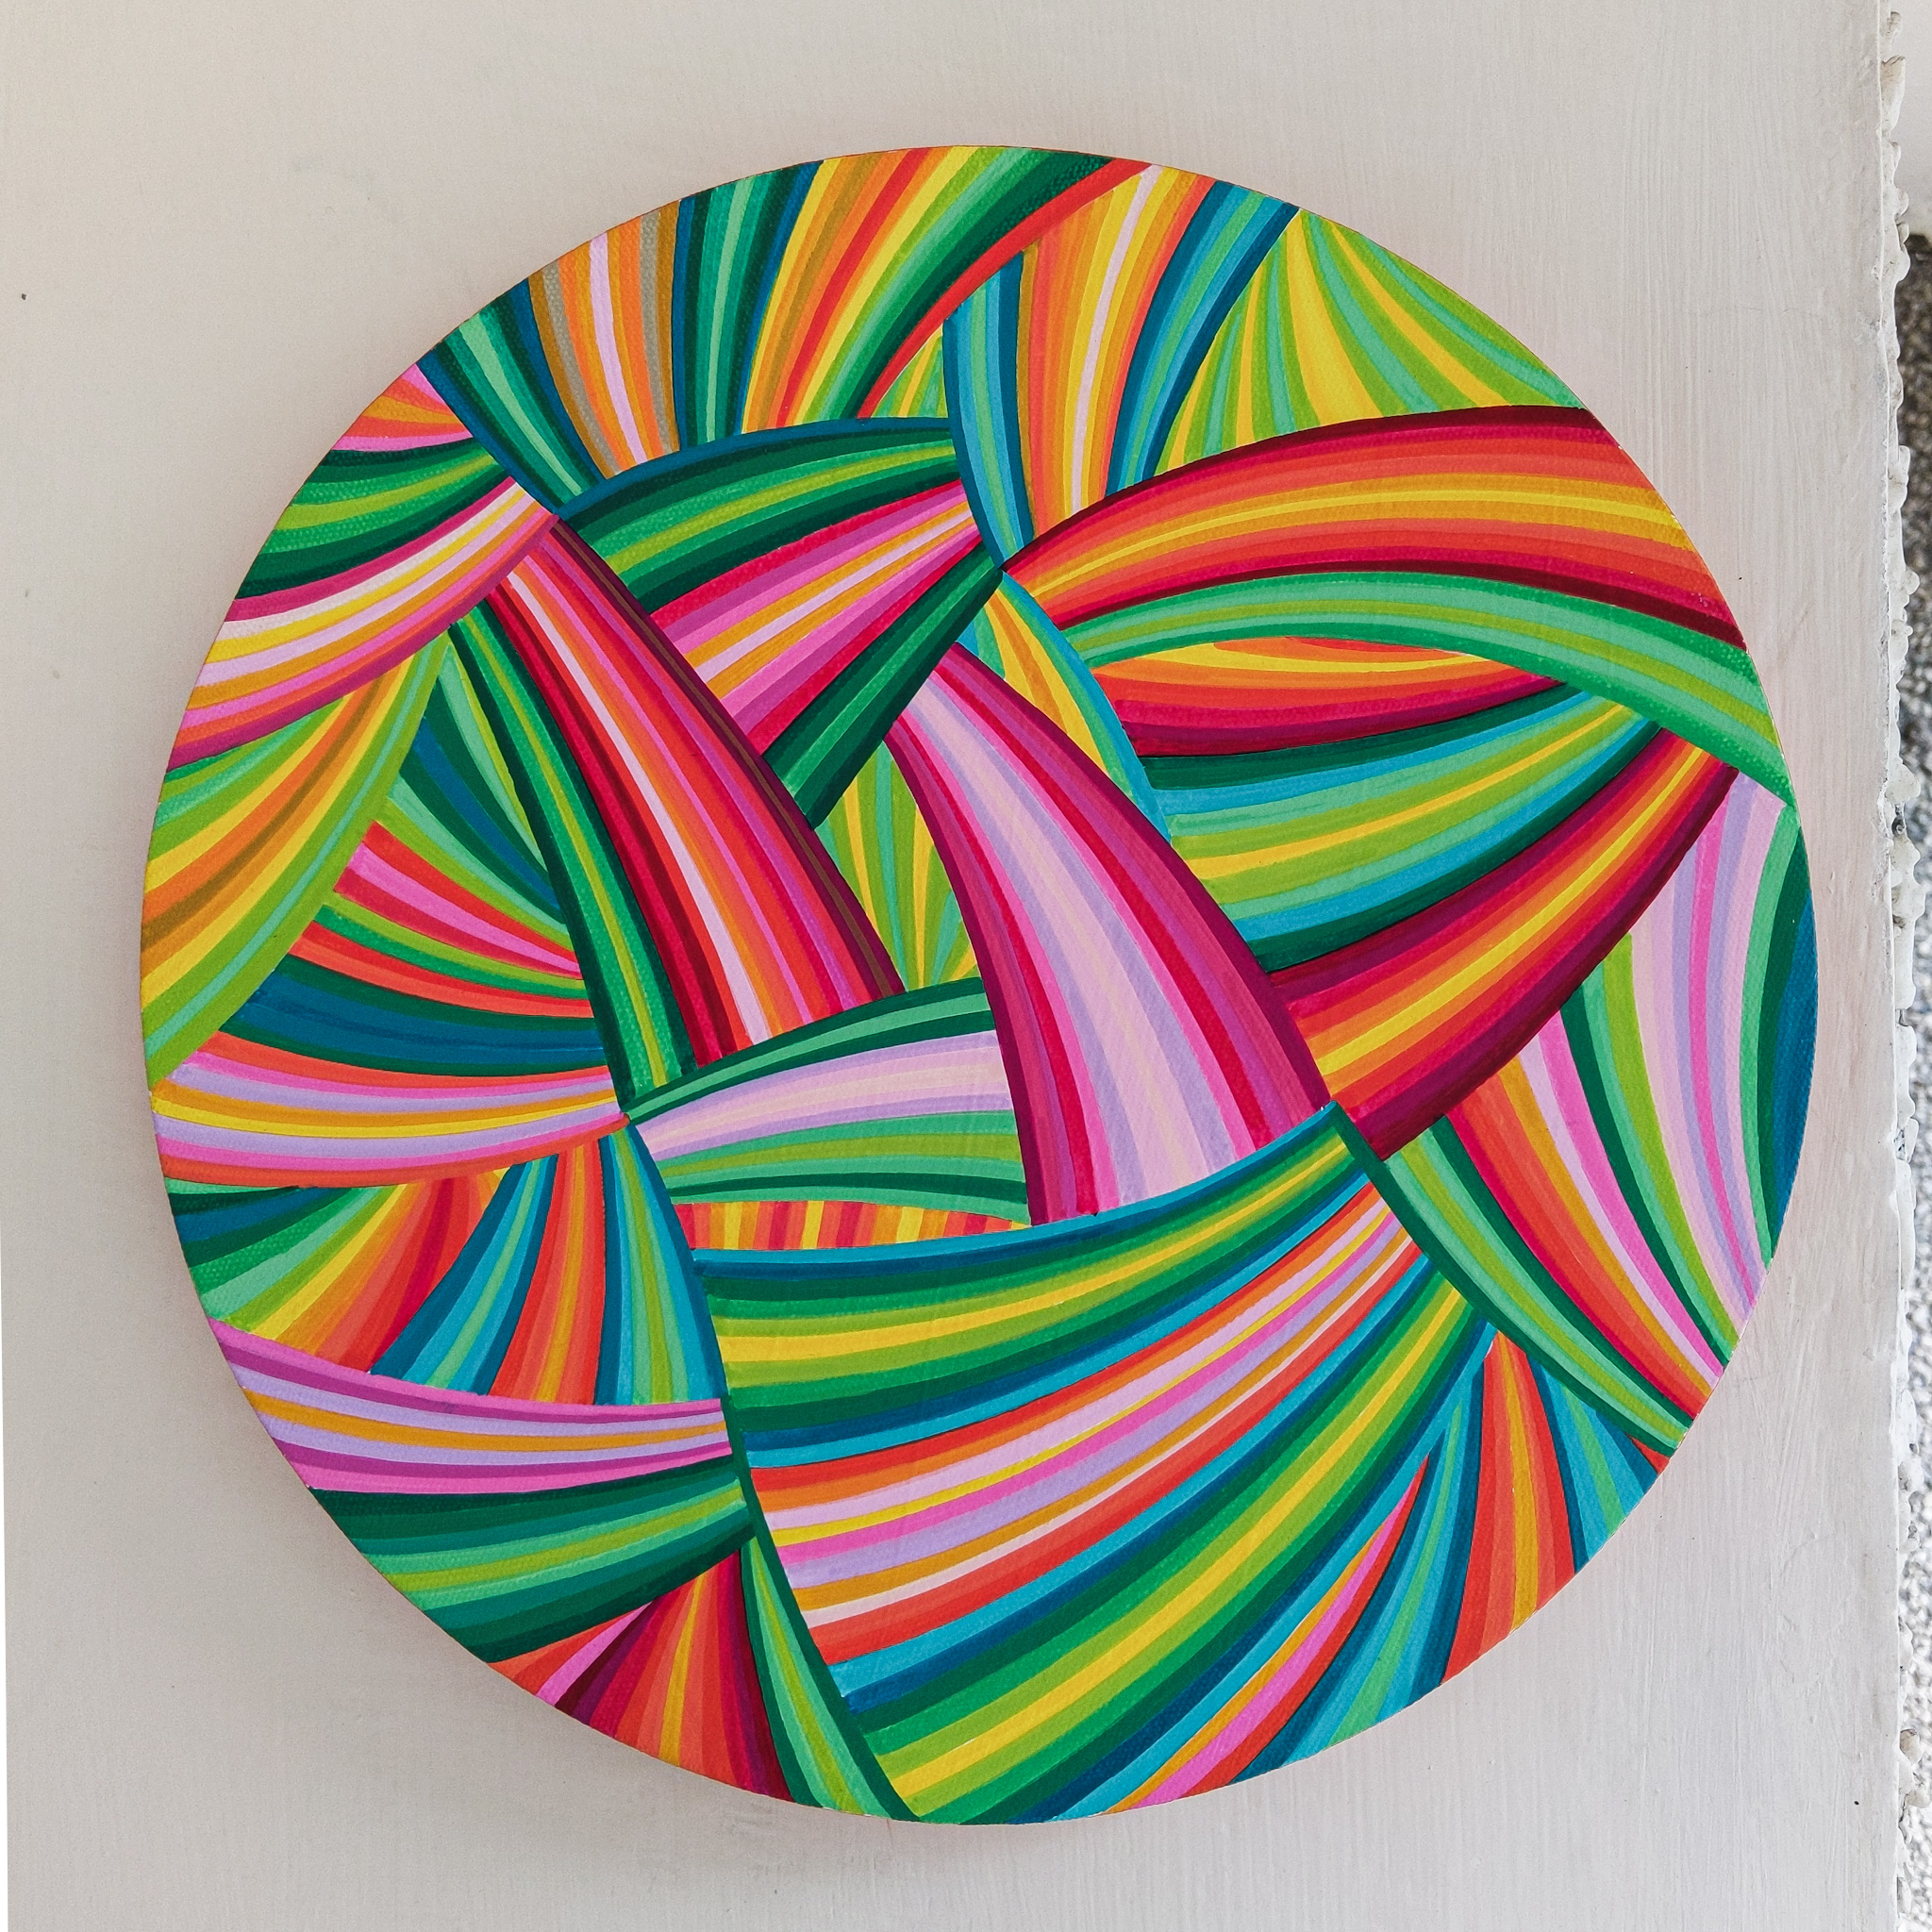 #ArtByNaina, abstract painting, abstractionism, circular canvas, contemporary art, geometric, geometric abstraction, geometric art, horizons art series, indian art, indian artist, khaosphilos, line art, line art series, lineation, naina redhu, naina.co, Original Art, original paintings, round canvas, solo exhibition, solo show, unique edition, rhubarb